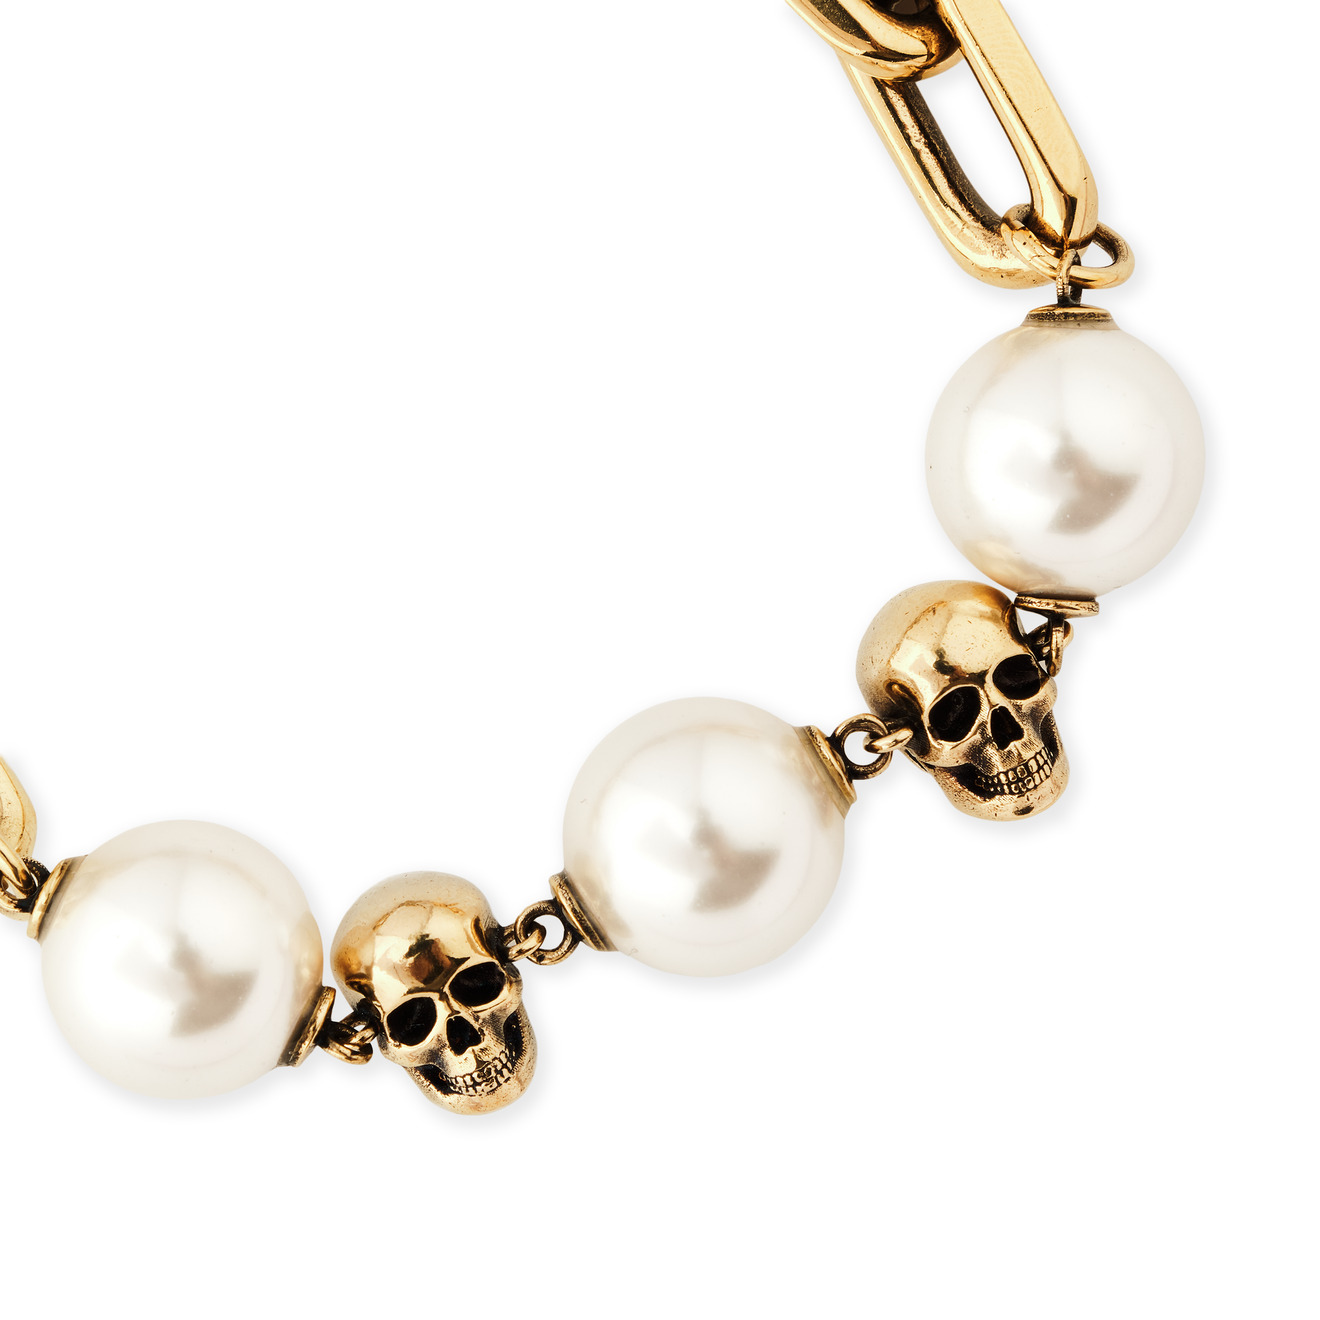 Alexander McQueen Золотистый браслет с жемчужинами CHAIN PEARL BRACELET doteffil new 8 9mm pearl 925 silver necklace pearl pendant chain natural freshwater pearl fine jewelry link women gift party